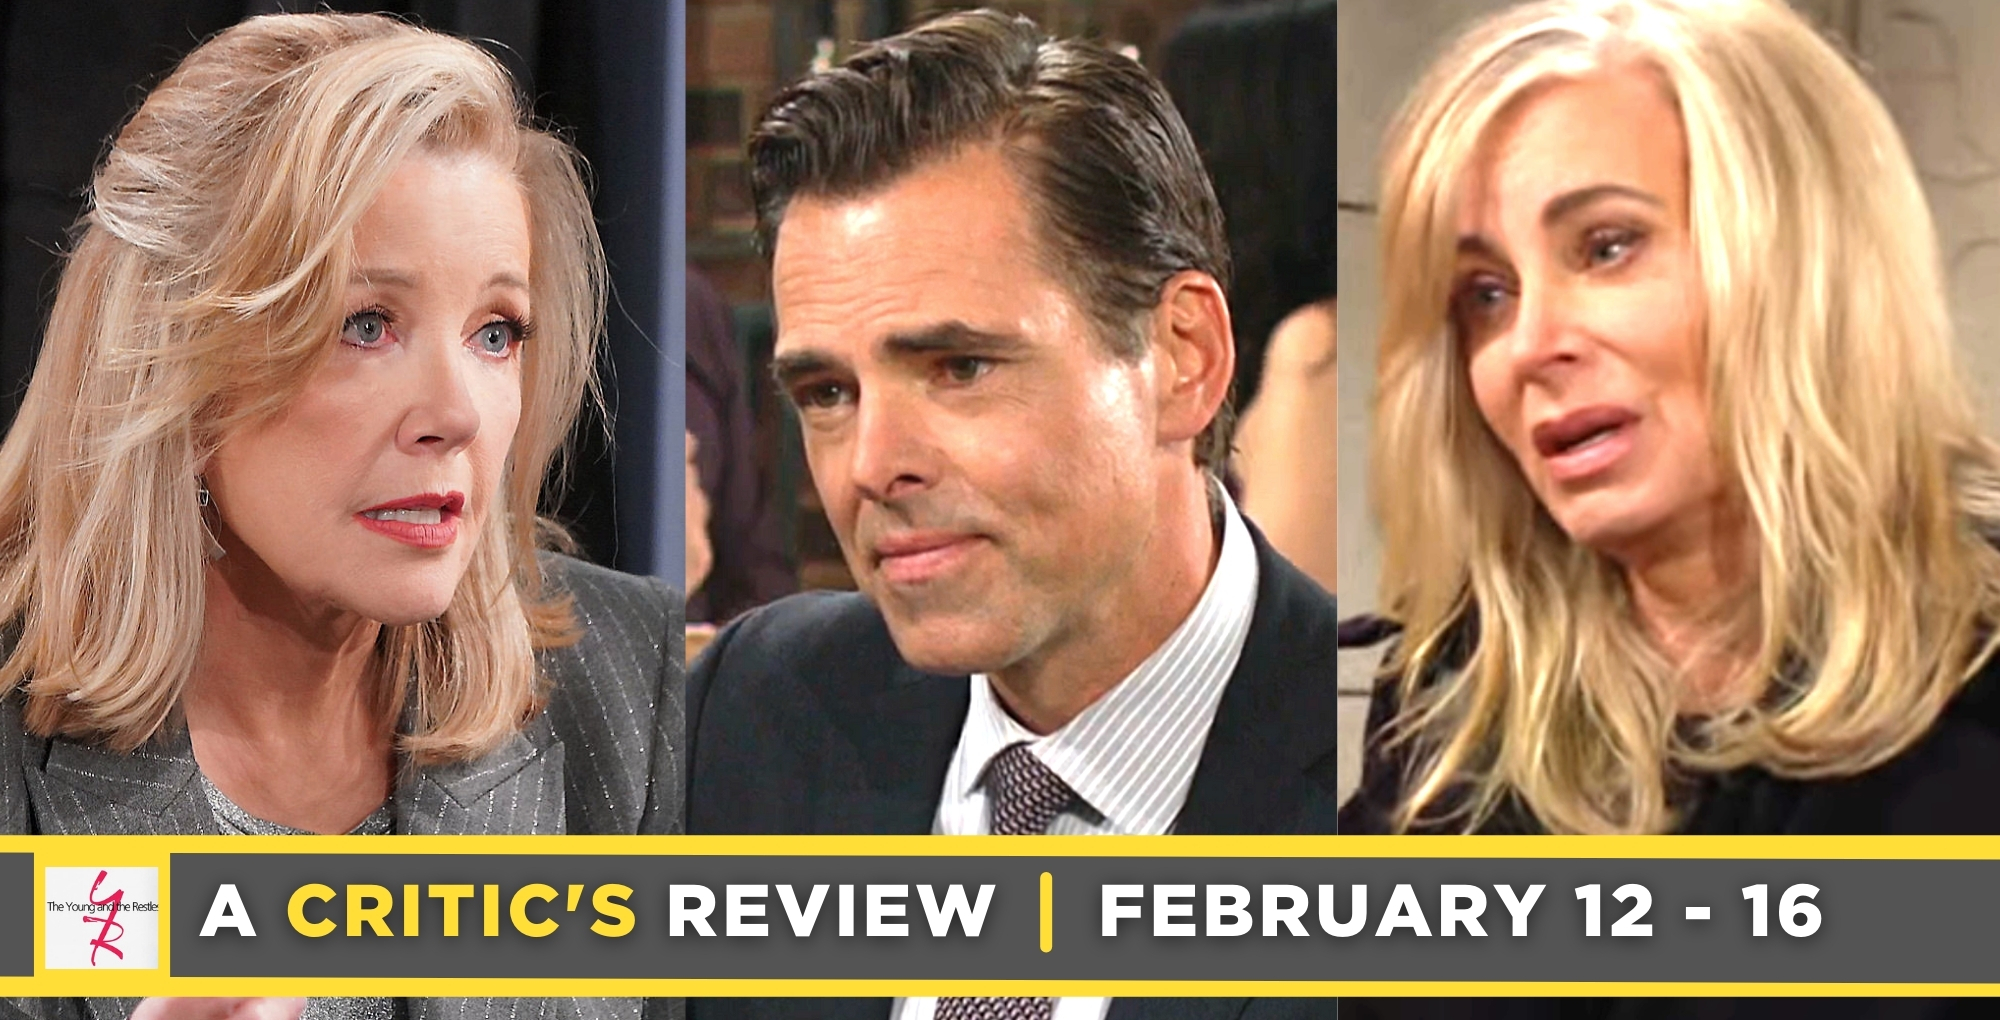 the young and the restless critic's review for february 12 - february 16, 2024, Nikki, Billy, Ashley